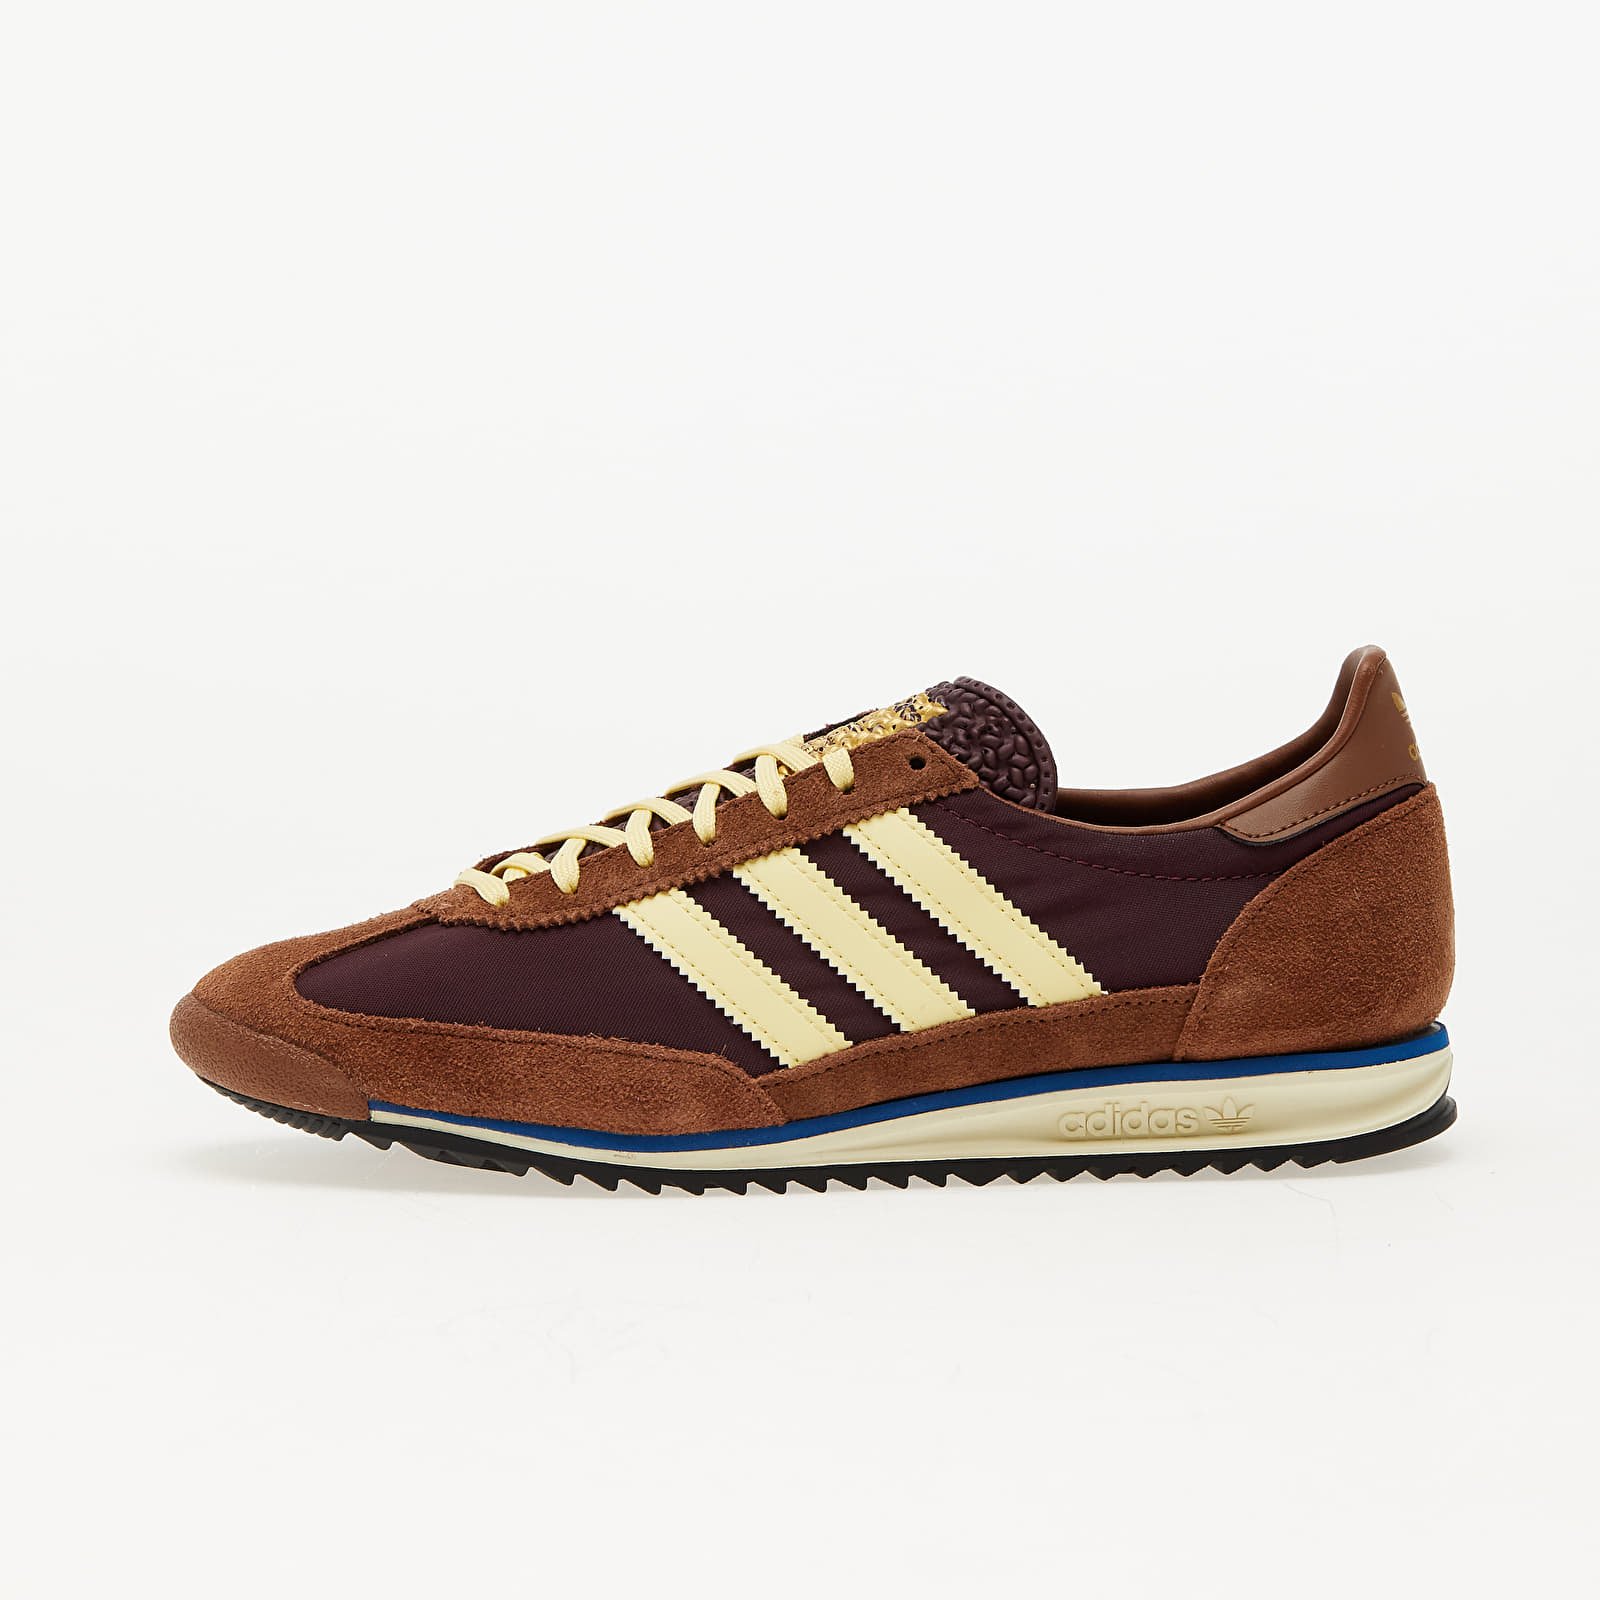 Women's shoes adidas SL 72 Og W Maroon/ Almond Yellow/ Preloved Brown